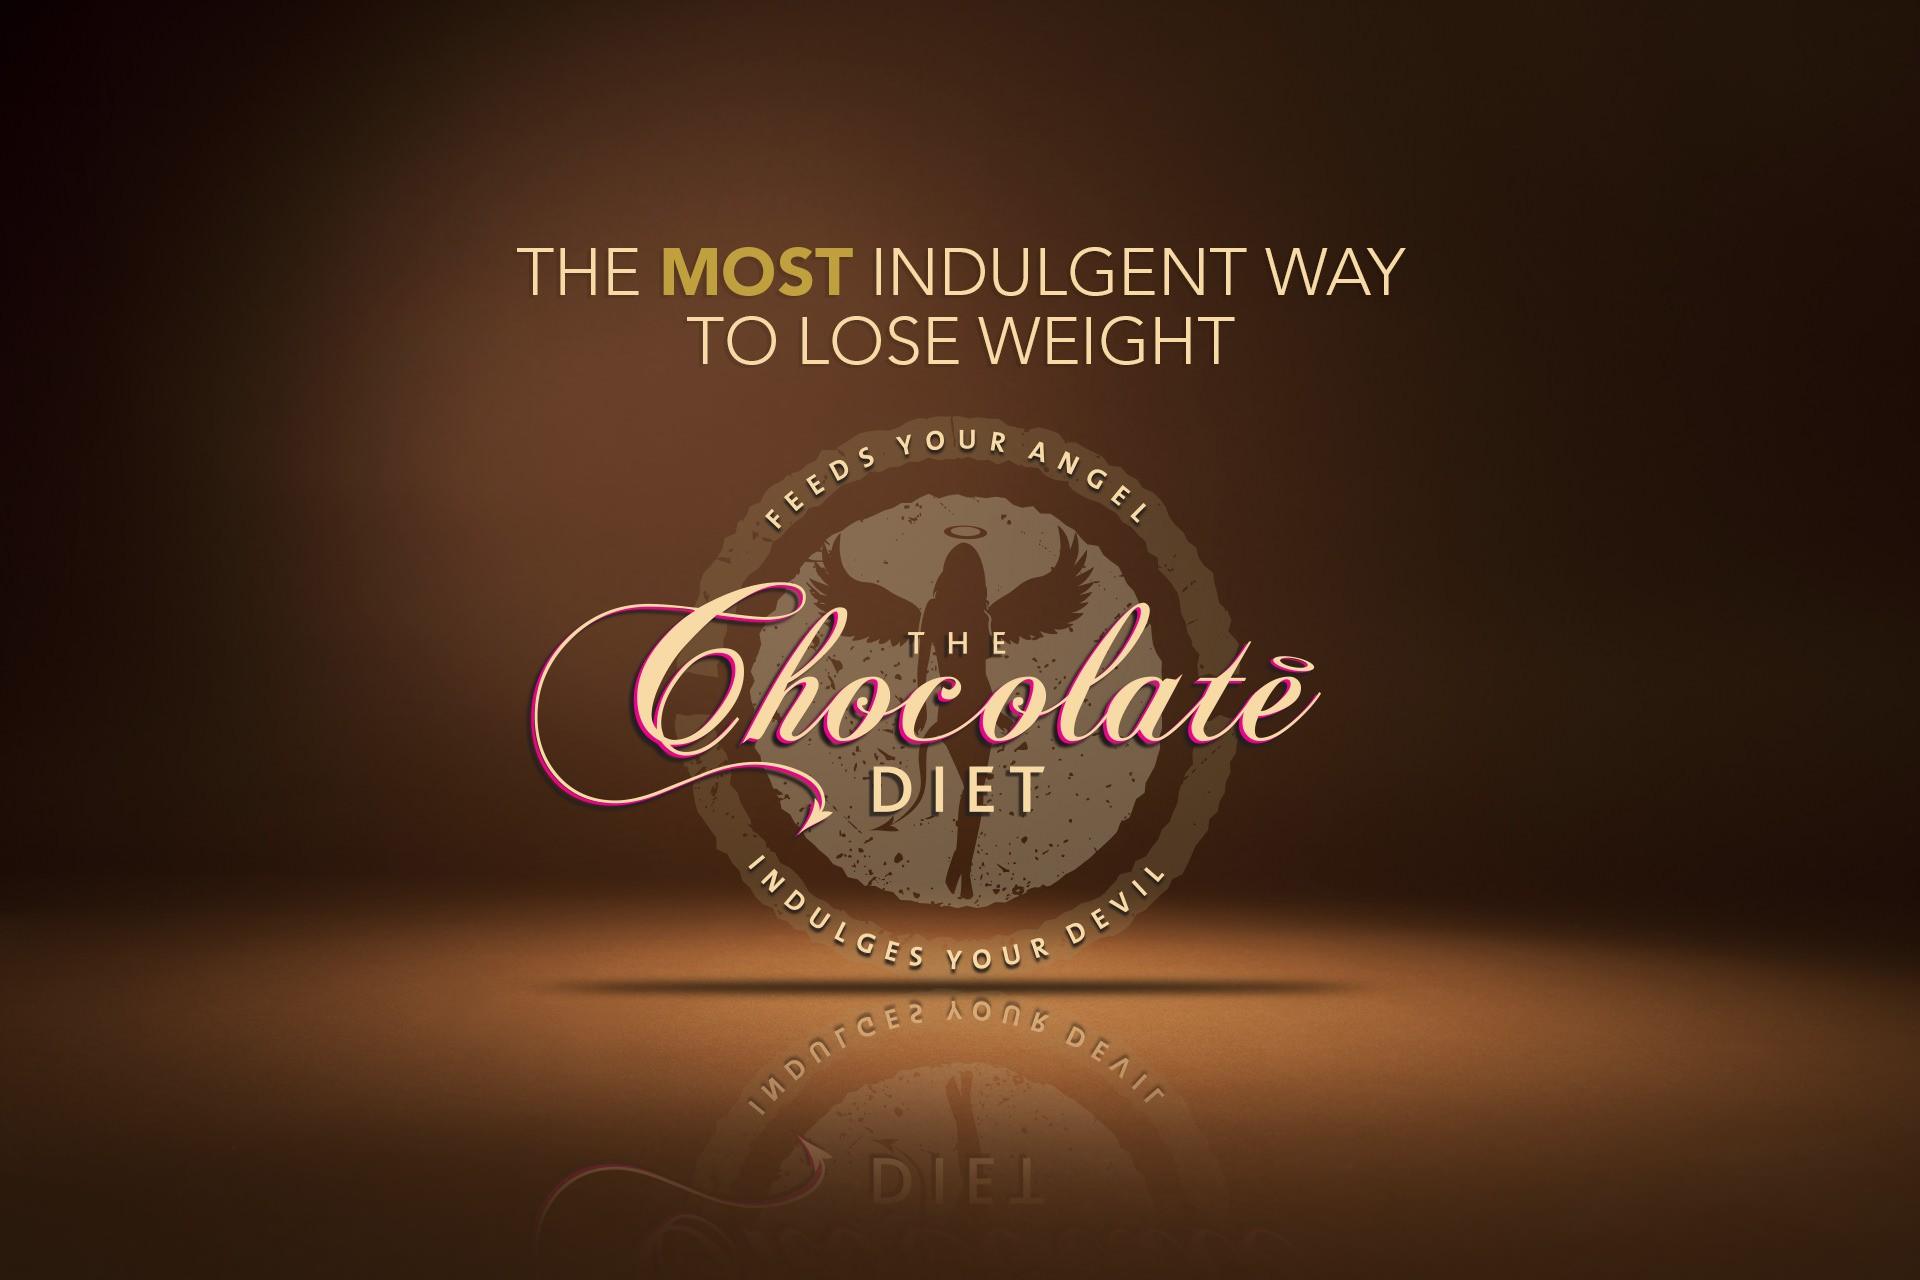 The Chocolate Diet - Part Two